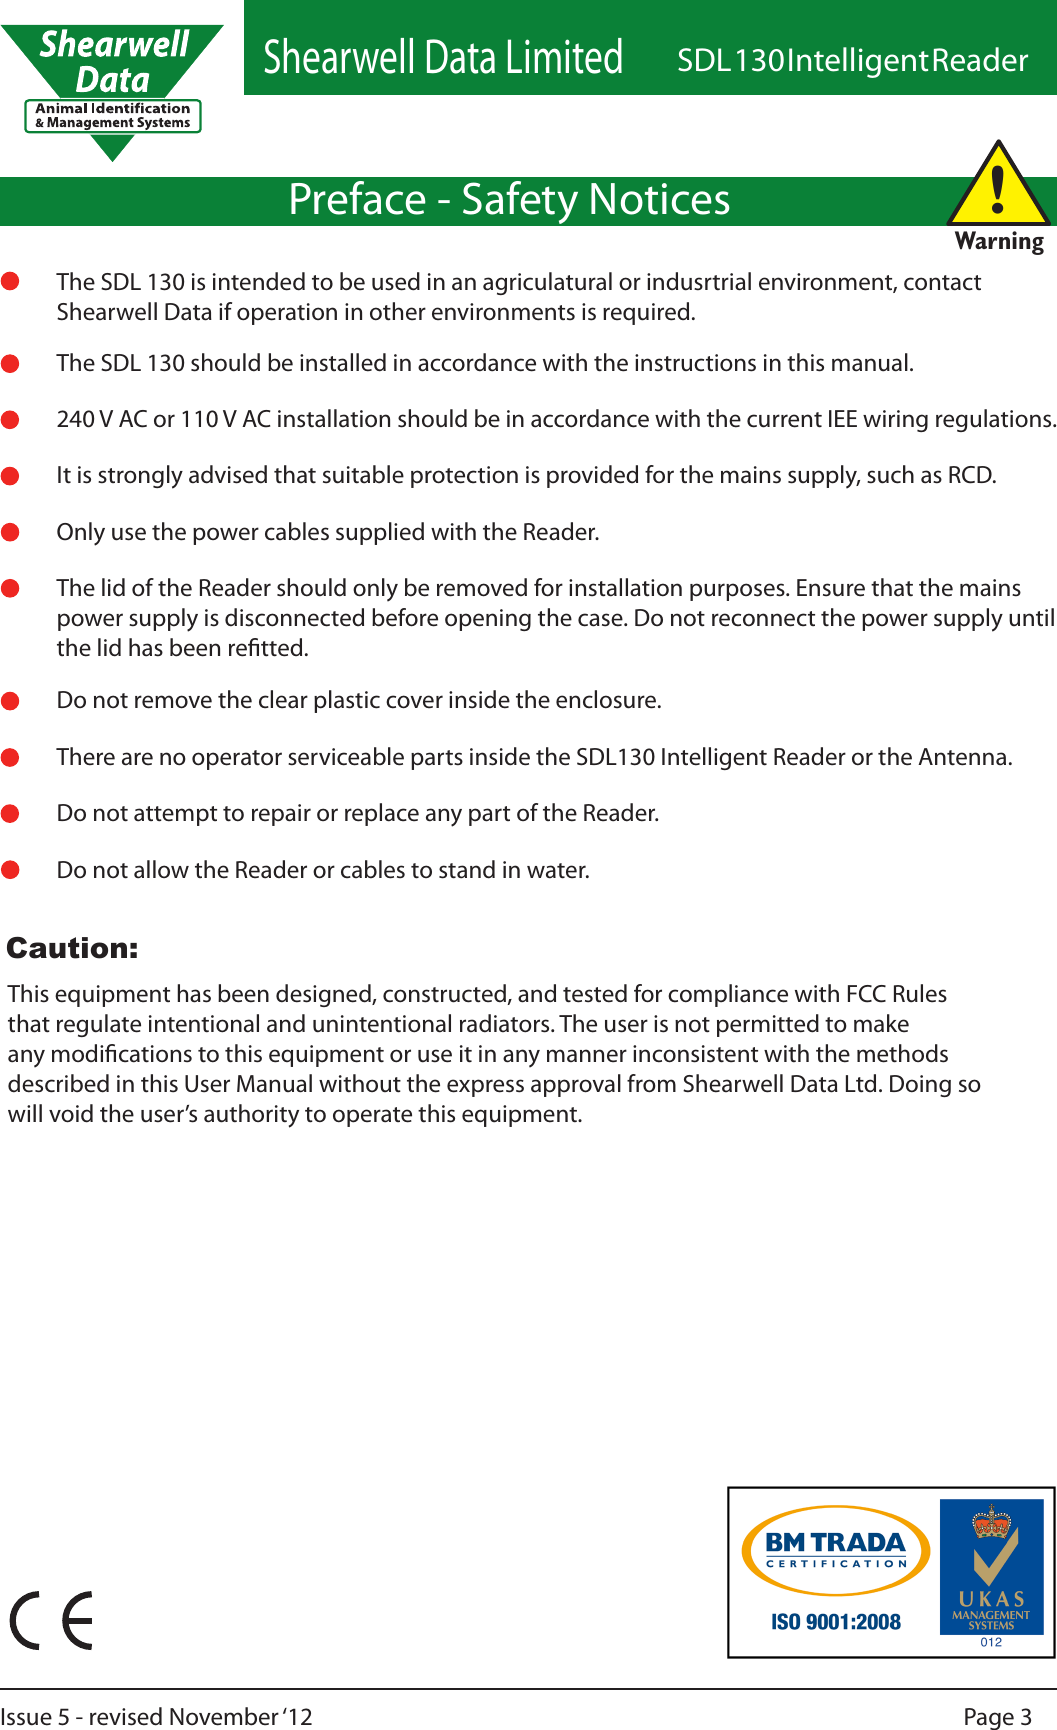 Shearwell Data LimitedSDL 130 Intelligent ReaderPage 3Issue 5 - revised November ‘12Preface - Safety Notices240 V AC or 110 V AC installation should be in accordance with the current IEE wiring regulations.The SDL 130 should be installed in accordance with the instructions in this manual.It is strongly advised that suitable protection is provided for the mains supply, such as RCD.Only use the power cables supplied with the Reader.The lid of the Reader should only be removed for installation purposes. Ensure that the mains power supply is disconnected before opening the case. Do not reconnect the power supply until the lid has been retted.Do not remove the clear plastic cover inside the enclosure.Do not attempt to repair or replace any part of the Reader.Do not allow the Reader or cables to stand in water.!WarningThere are no operator serviceable parts inside the SDL130 Intelligent Reader or the Antenna.This equipment has been designed, constructed, and tested for compliance with FCC Rules that regulate intentional and unintentional radiators. The user is not permitted to make any modications to this equipment or use it in any manner inconsistent with the methods described in this User Manual without the express approval from Shearwell Data Ltd. Doing so will void the user’s authority to operate this equipment.The SDL 130 is intended to be used in an agriculatural or indusrtrial environment, contact Shearwell Data if operation in other environments is required.Caution: